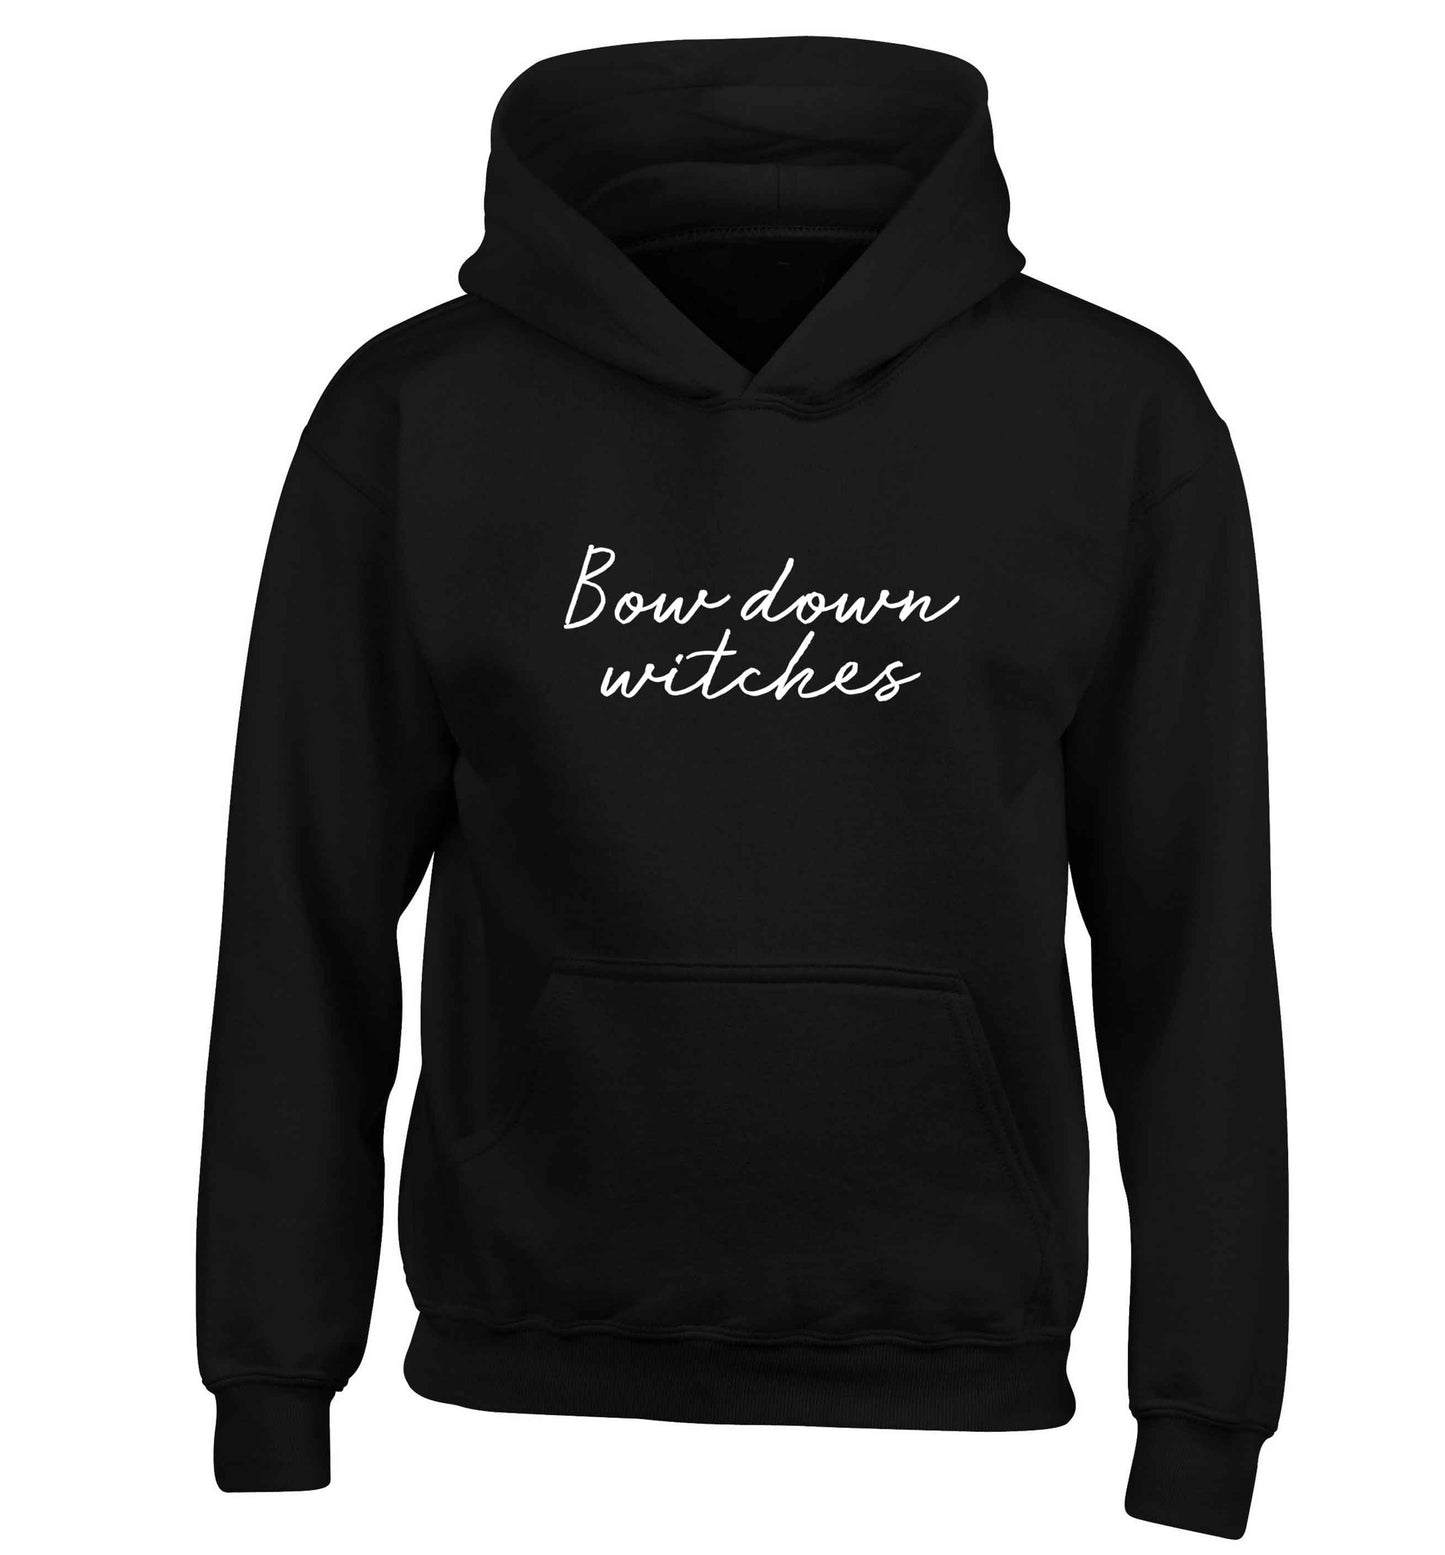 Bow down witches children's black hoodie 12-13 Years